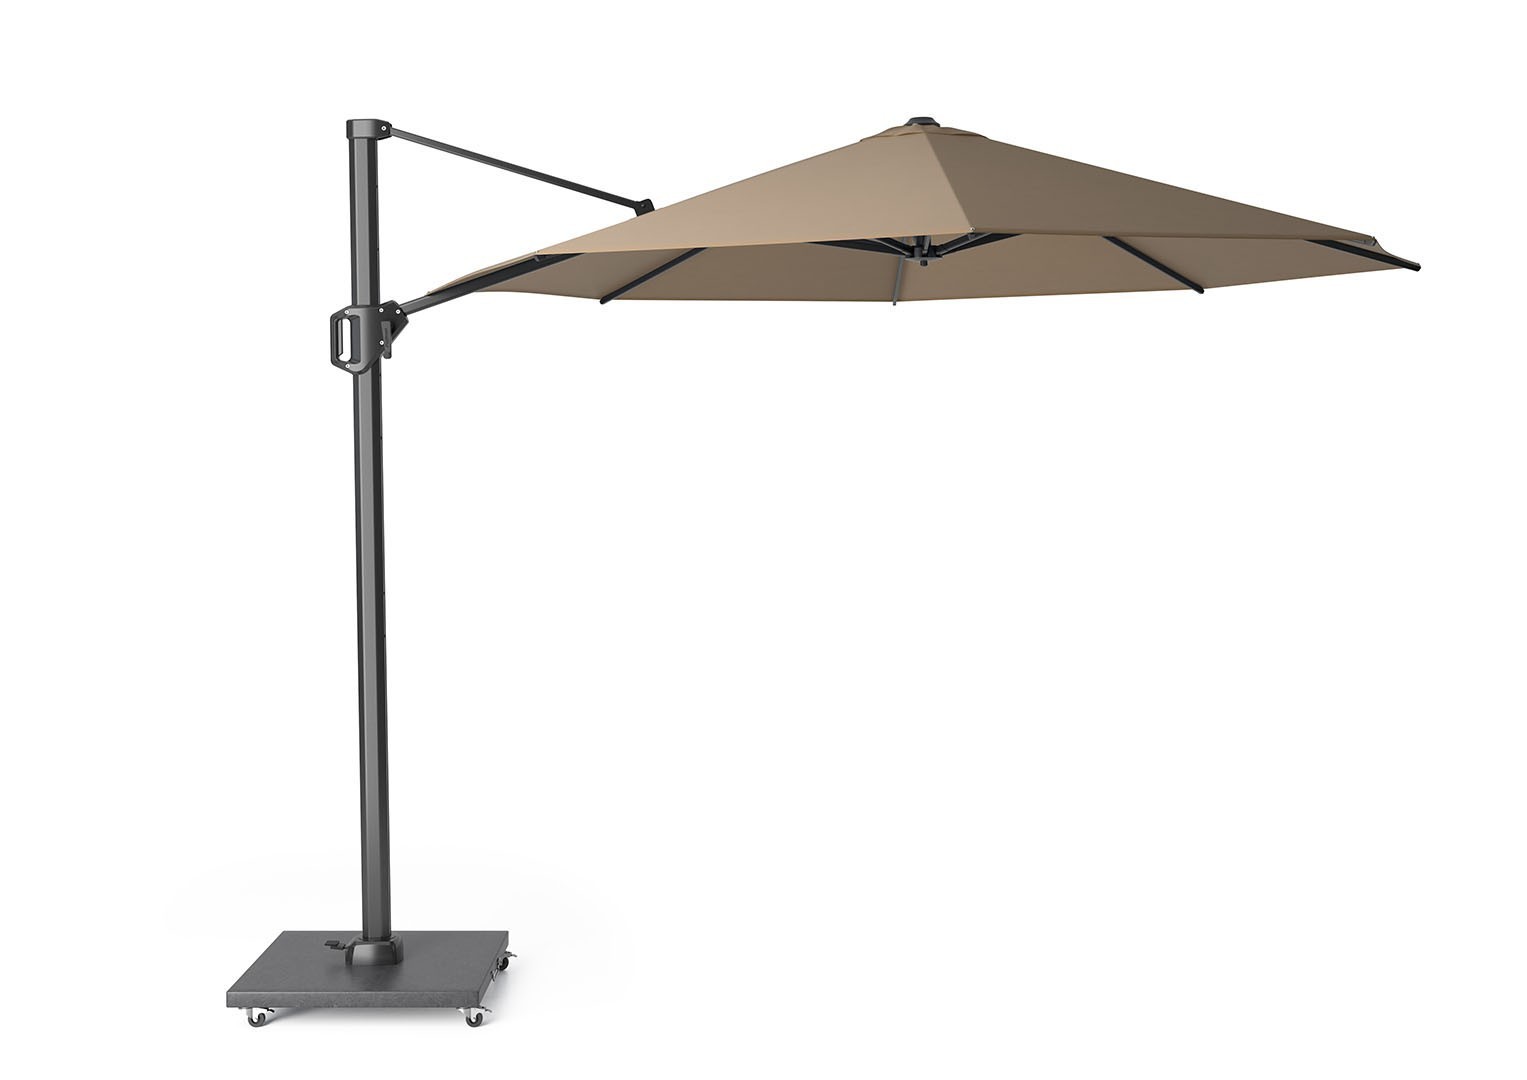 Parasol ogrodowy Challenger T1 3,5M Taupe